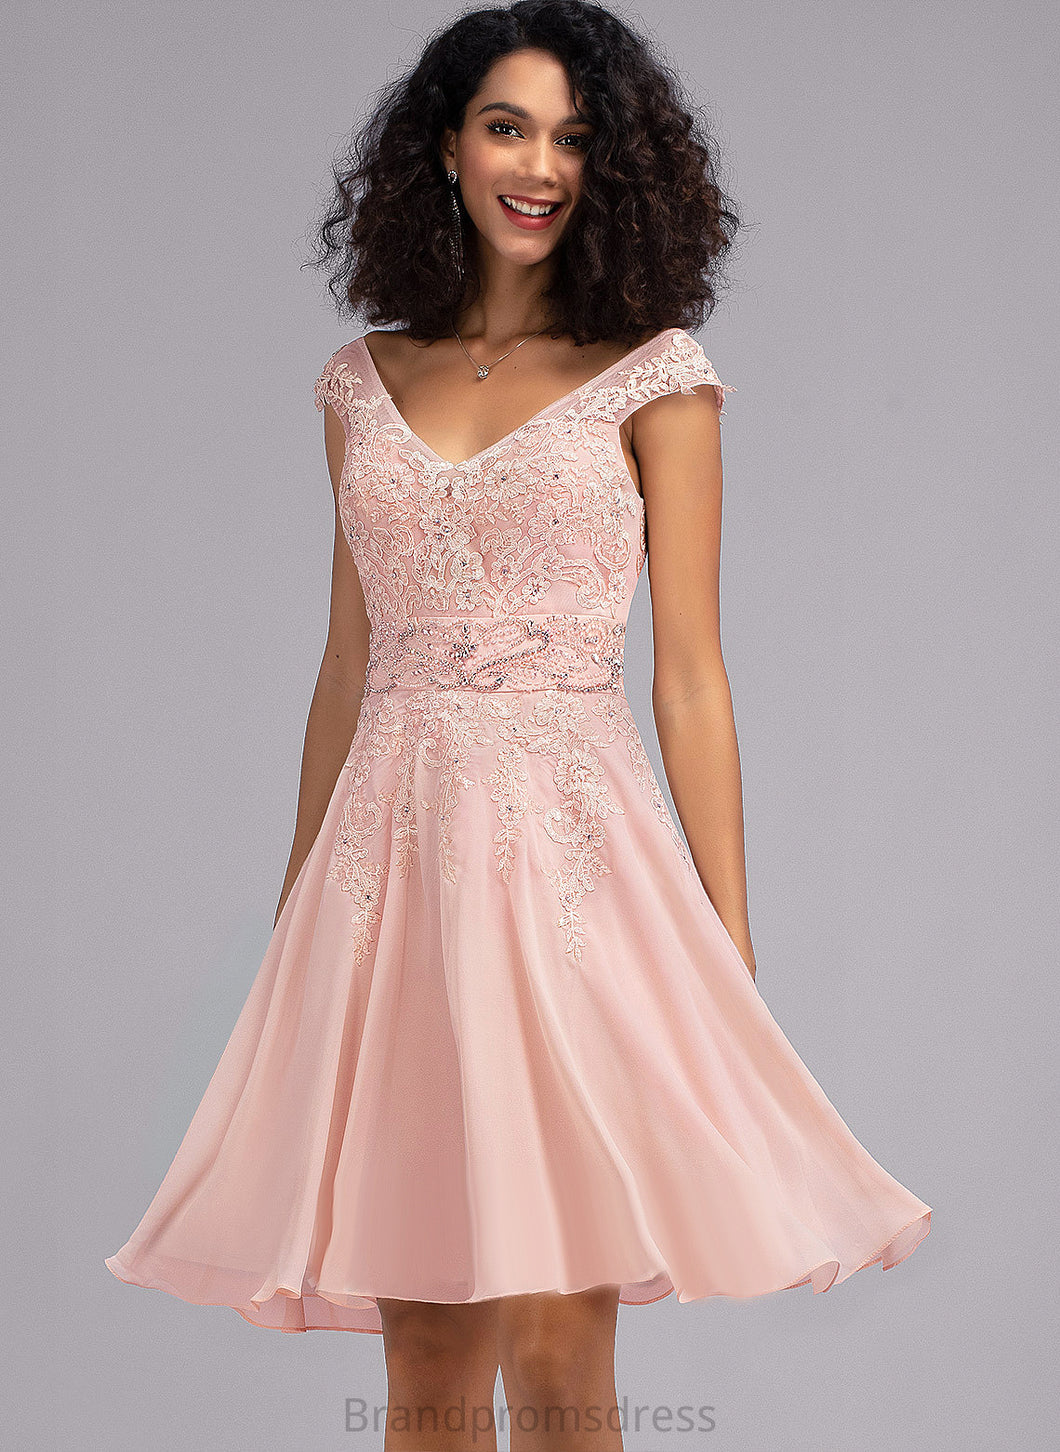 Callie Dress Beading Homecoming Dresses With Knee-Length A-Line Chiffon Homecoming Lace V-neck